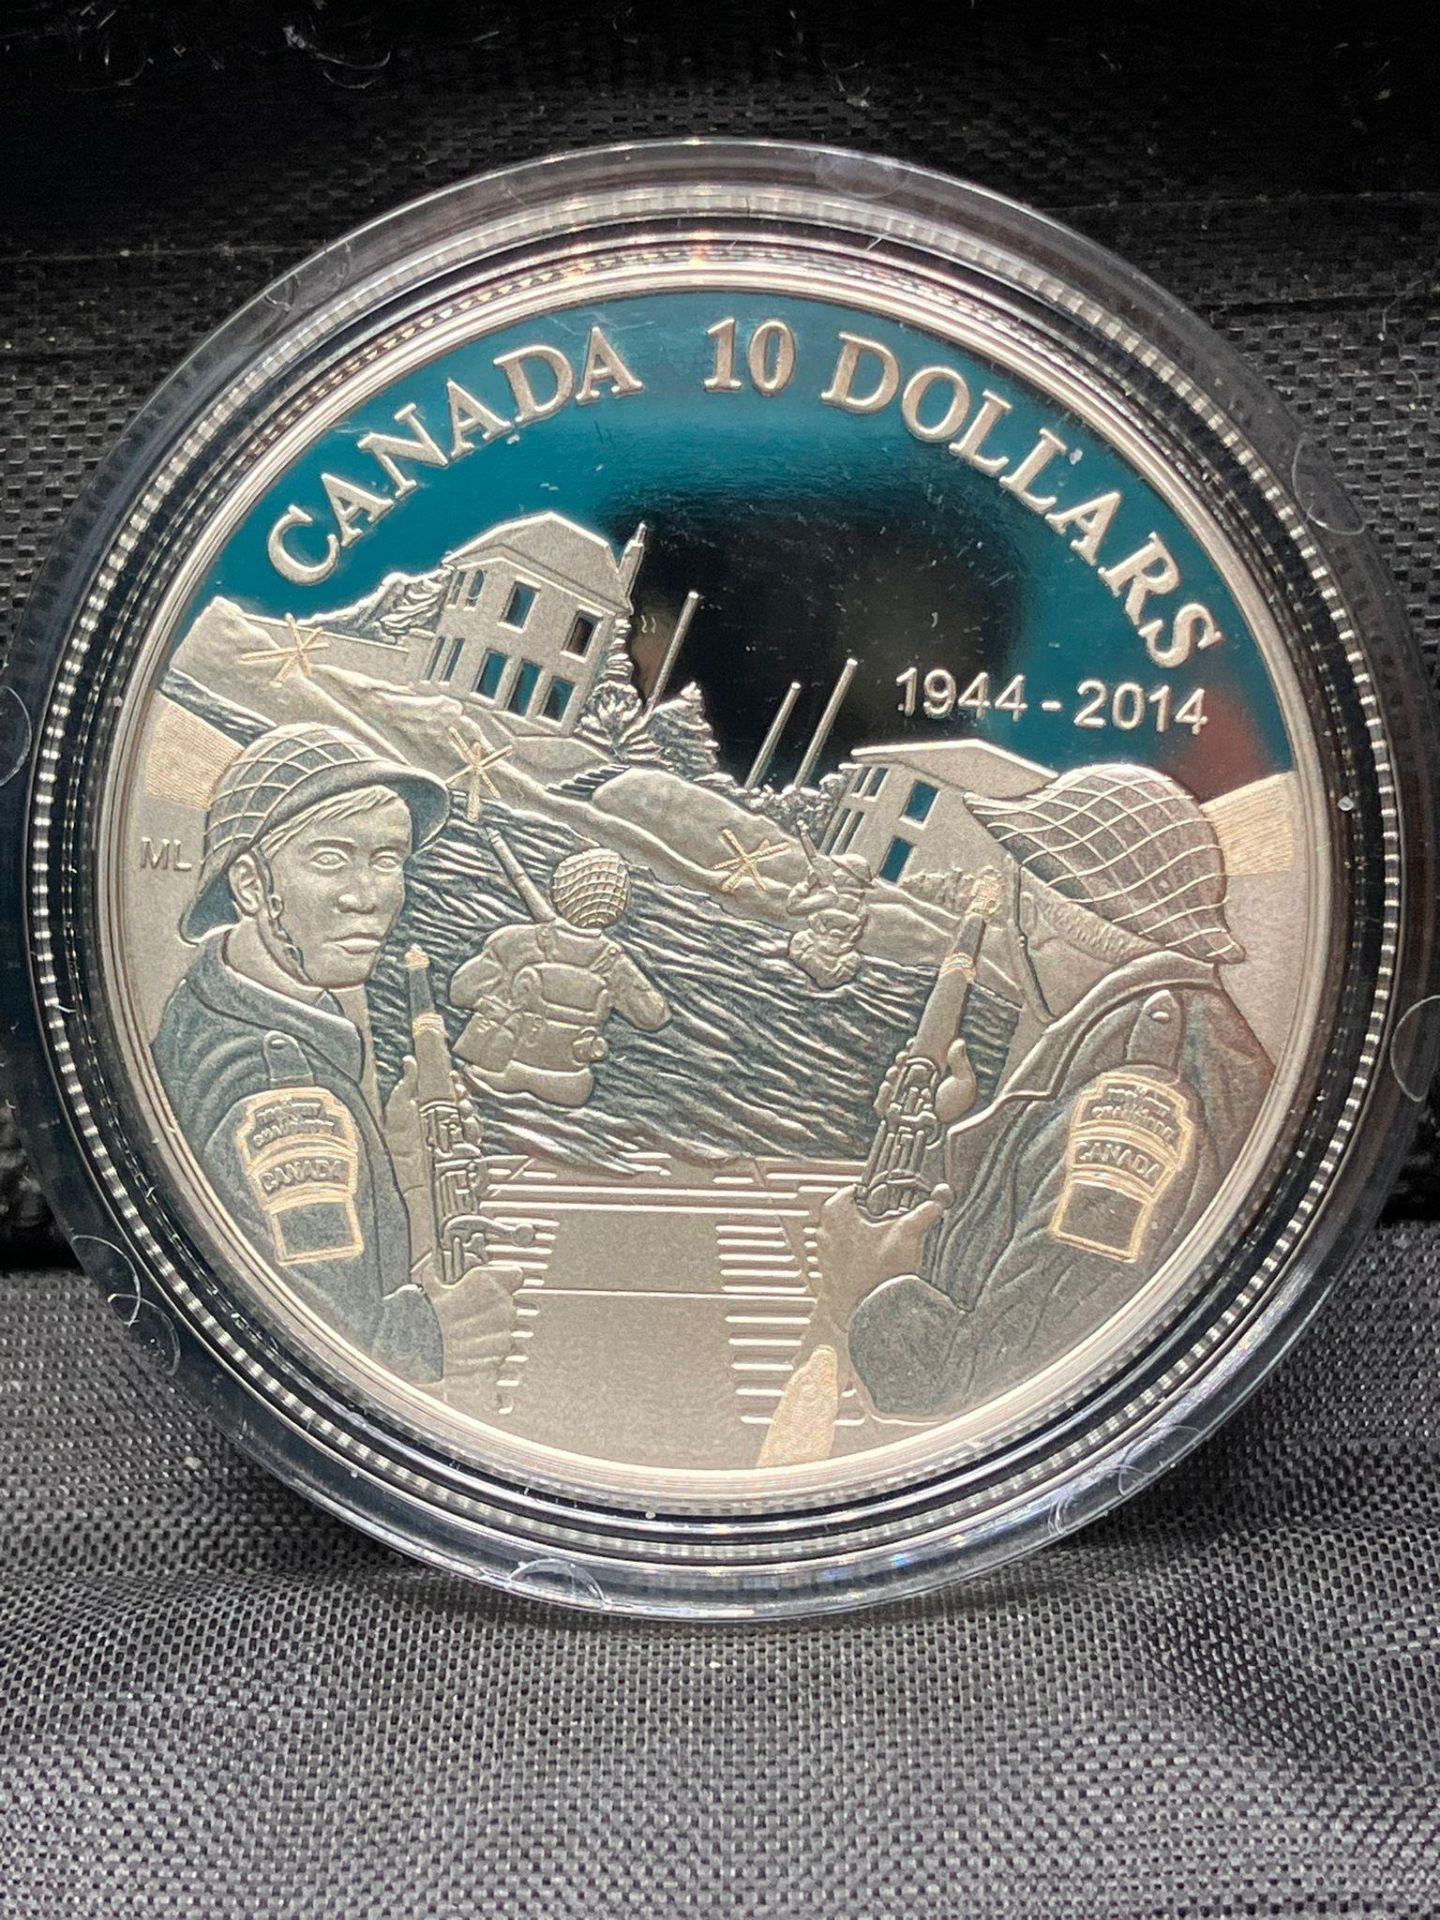 2014 CANADIAN D-DAY 10 DOLLAR COIN. Struck in PURE SILVER by the Royal Canadian Mint to - Bild 7 aus 7